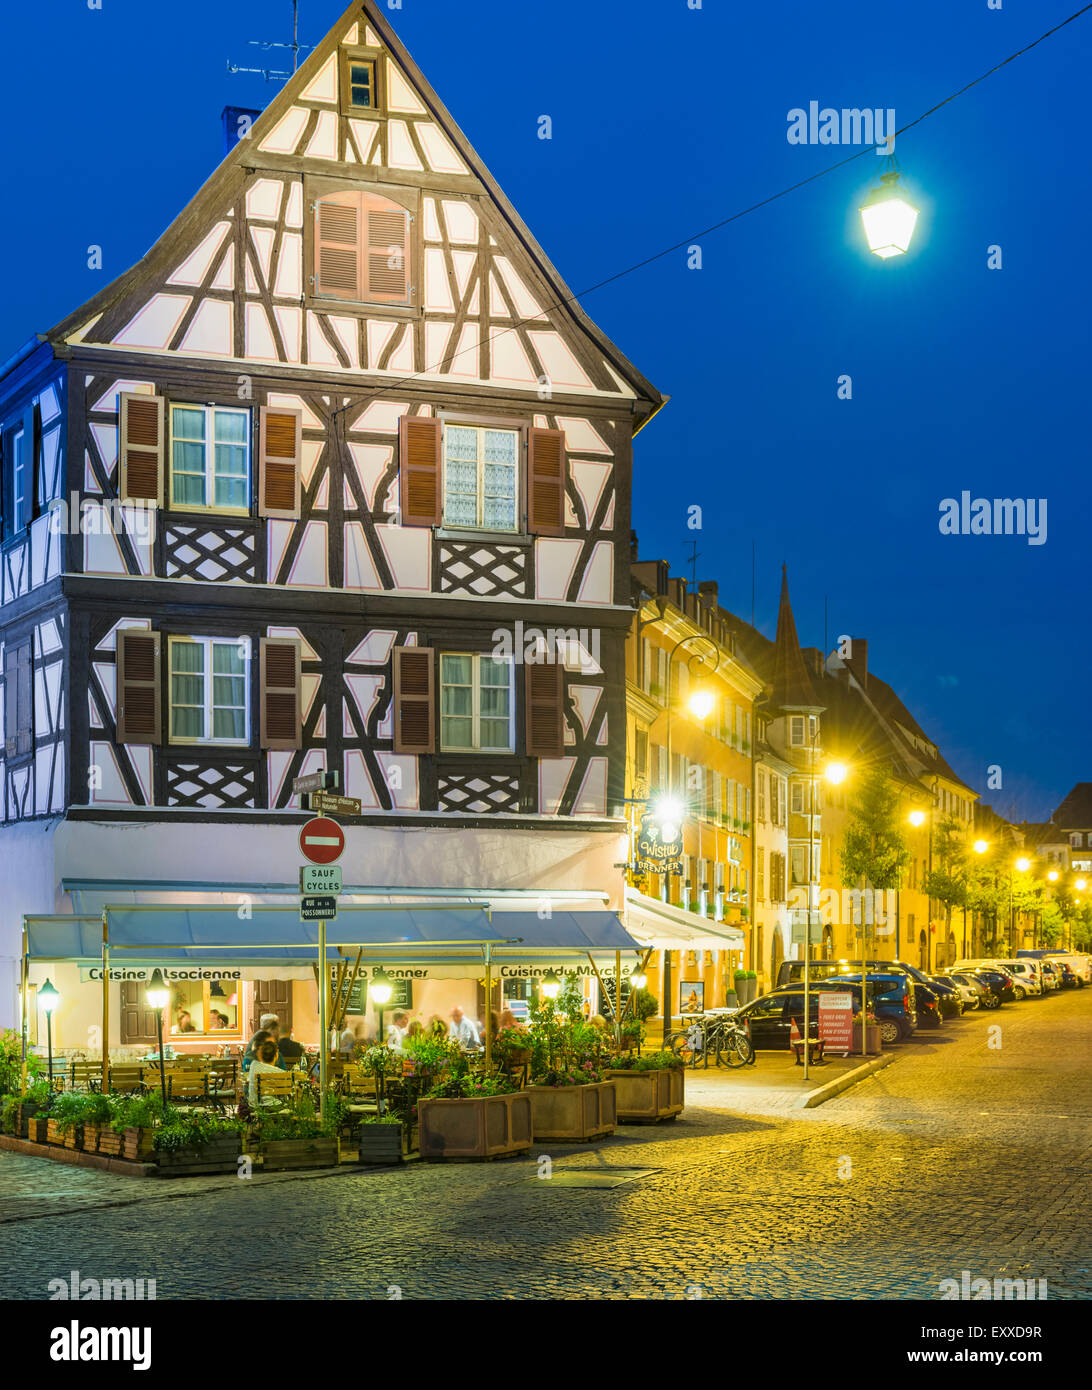 Old Town district in Colmar, Alsace wine region, France, Europe with restaurant and medieval buildings Stock Photo